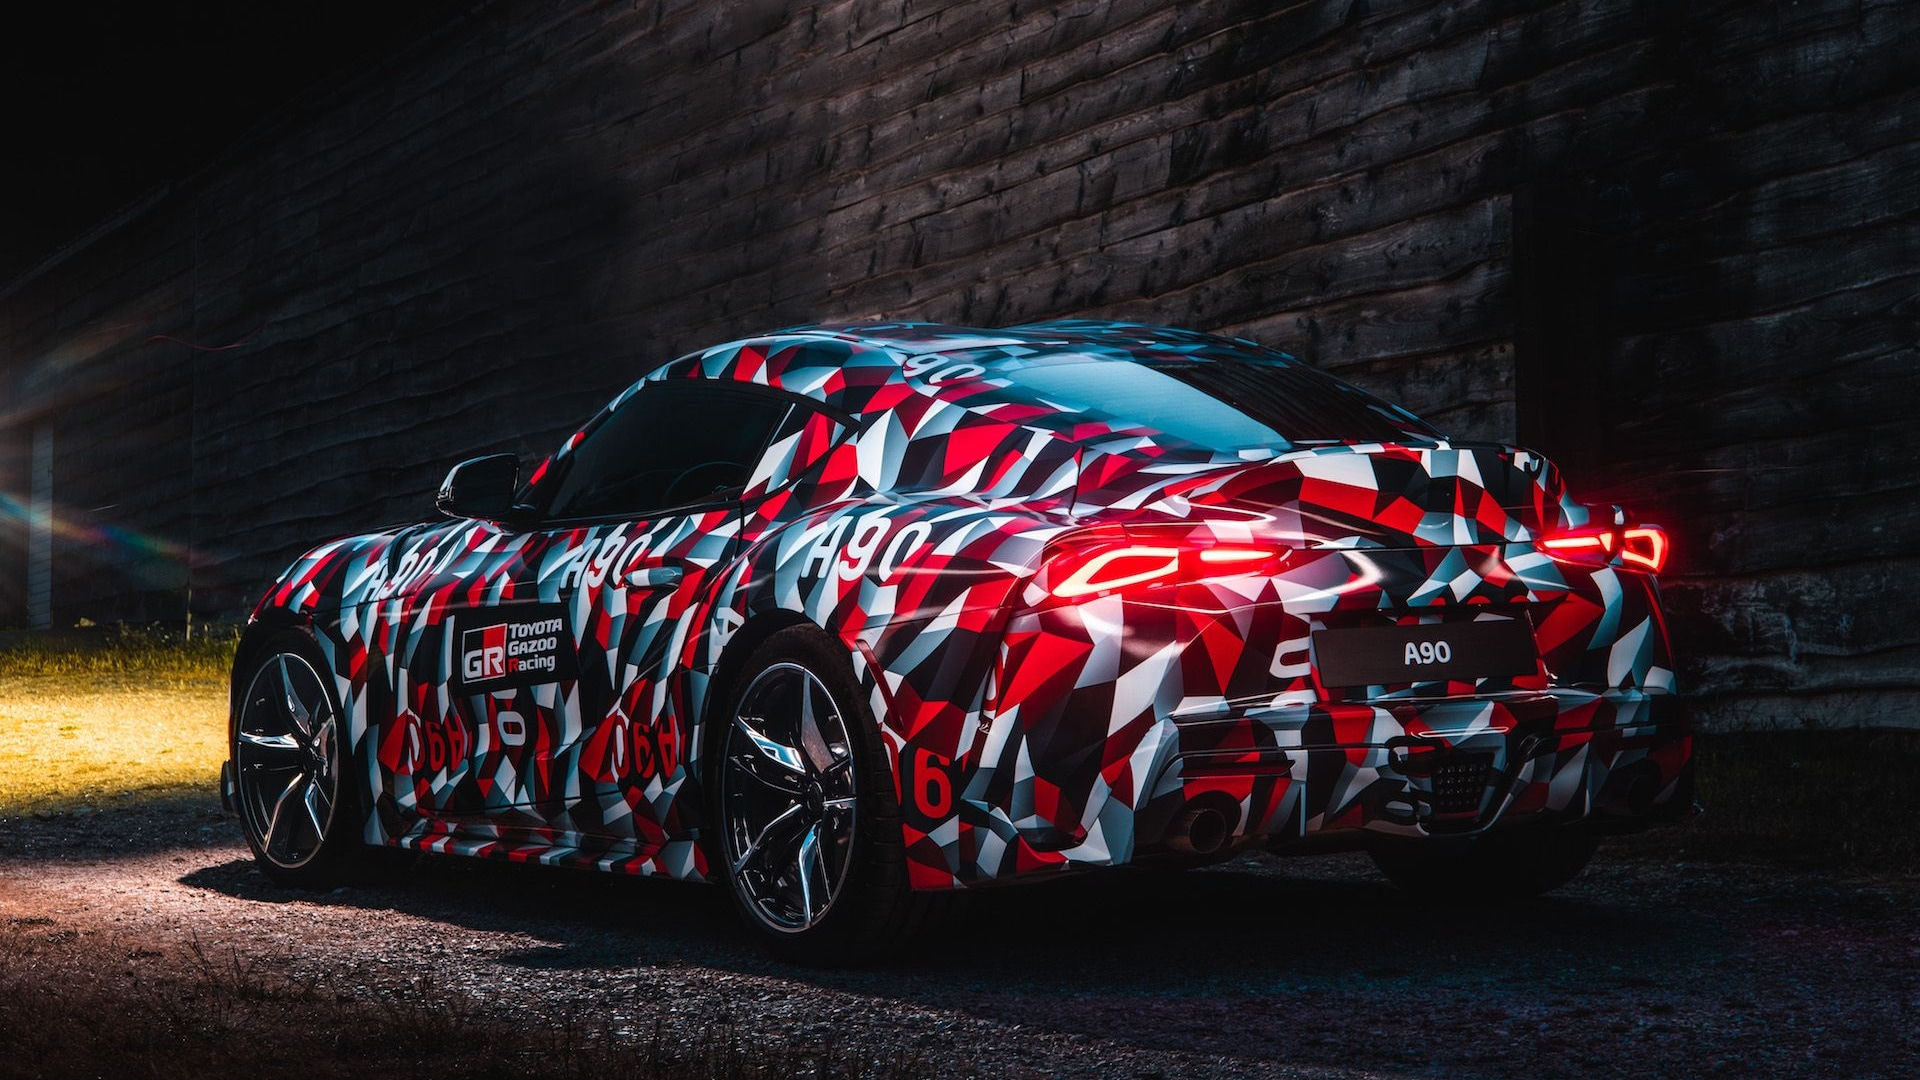 Toyota Supra dynamic debut at 2018 Goodwood Festival of Speed